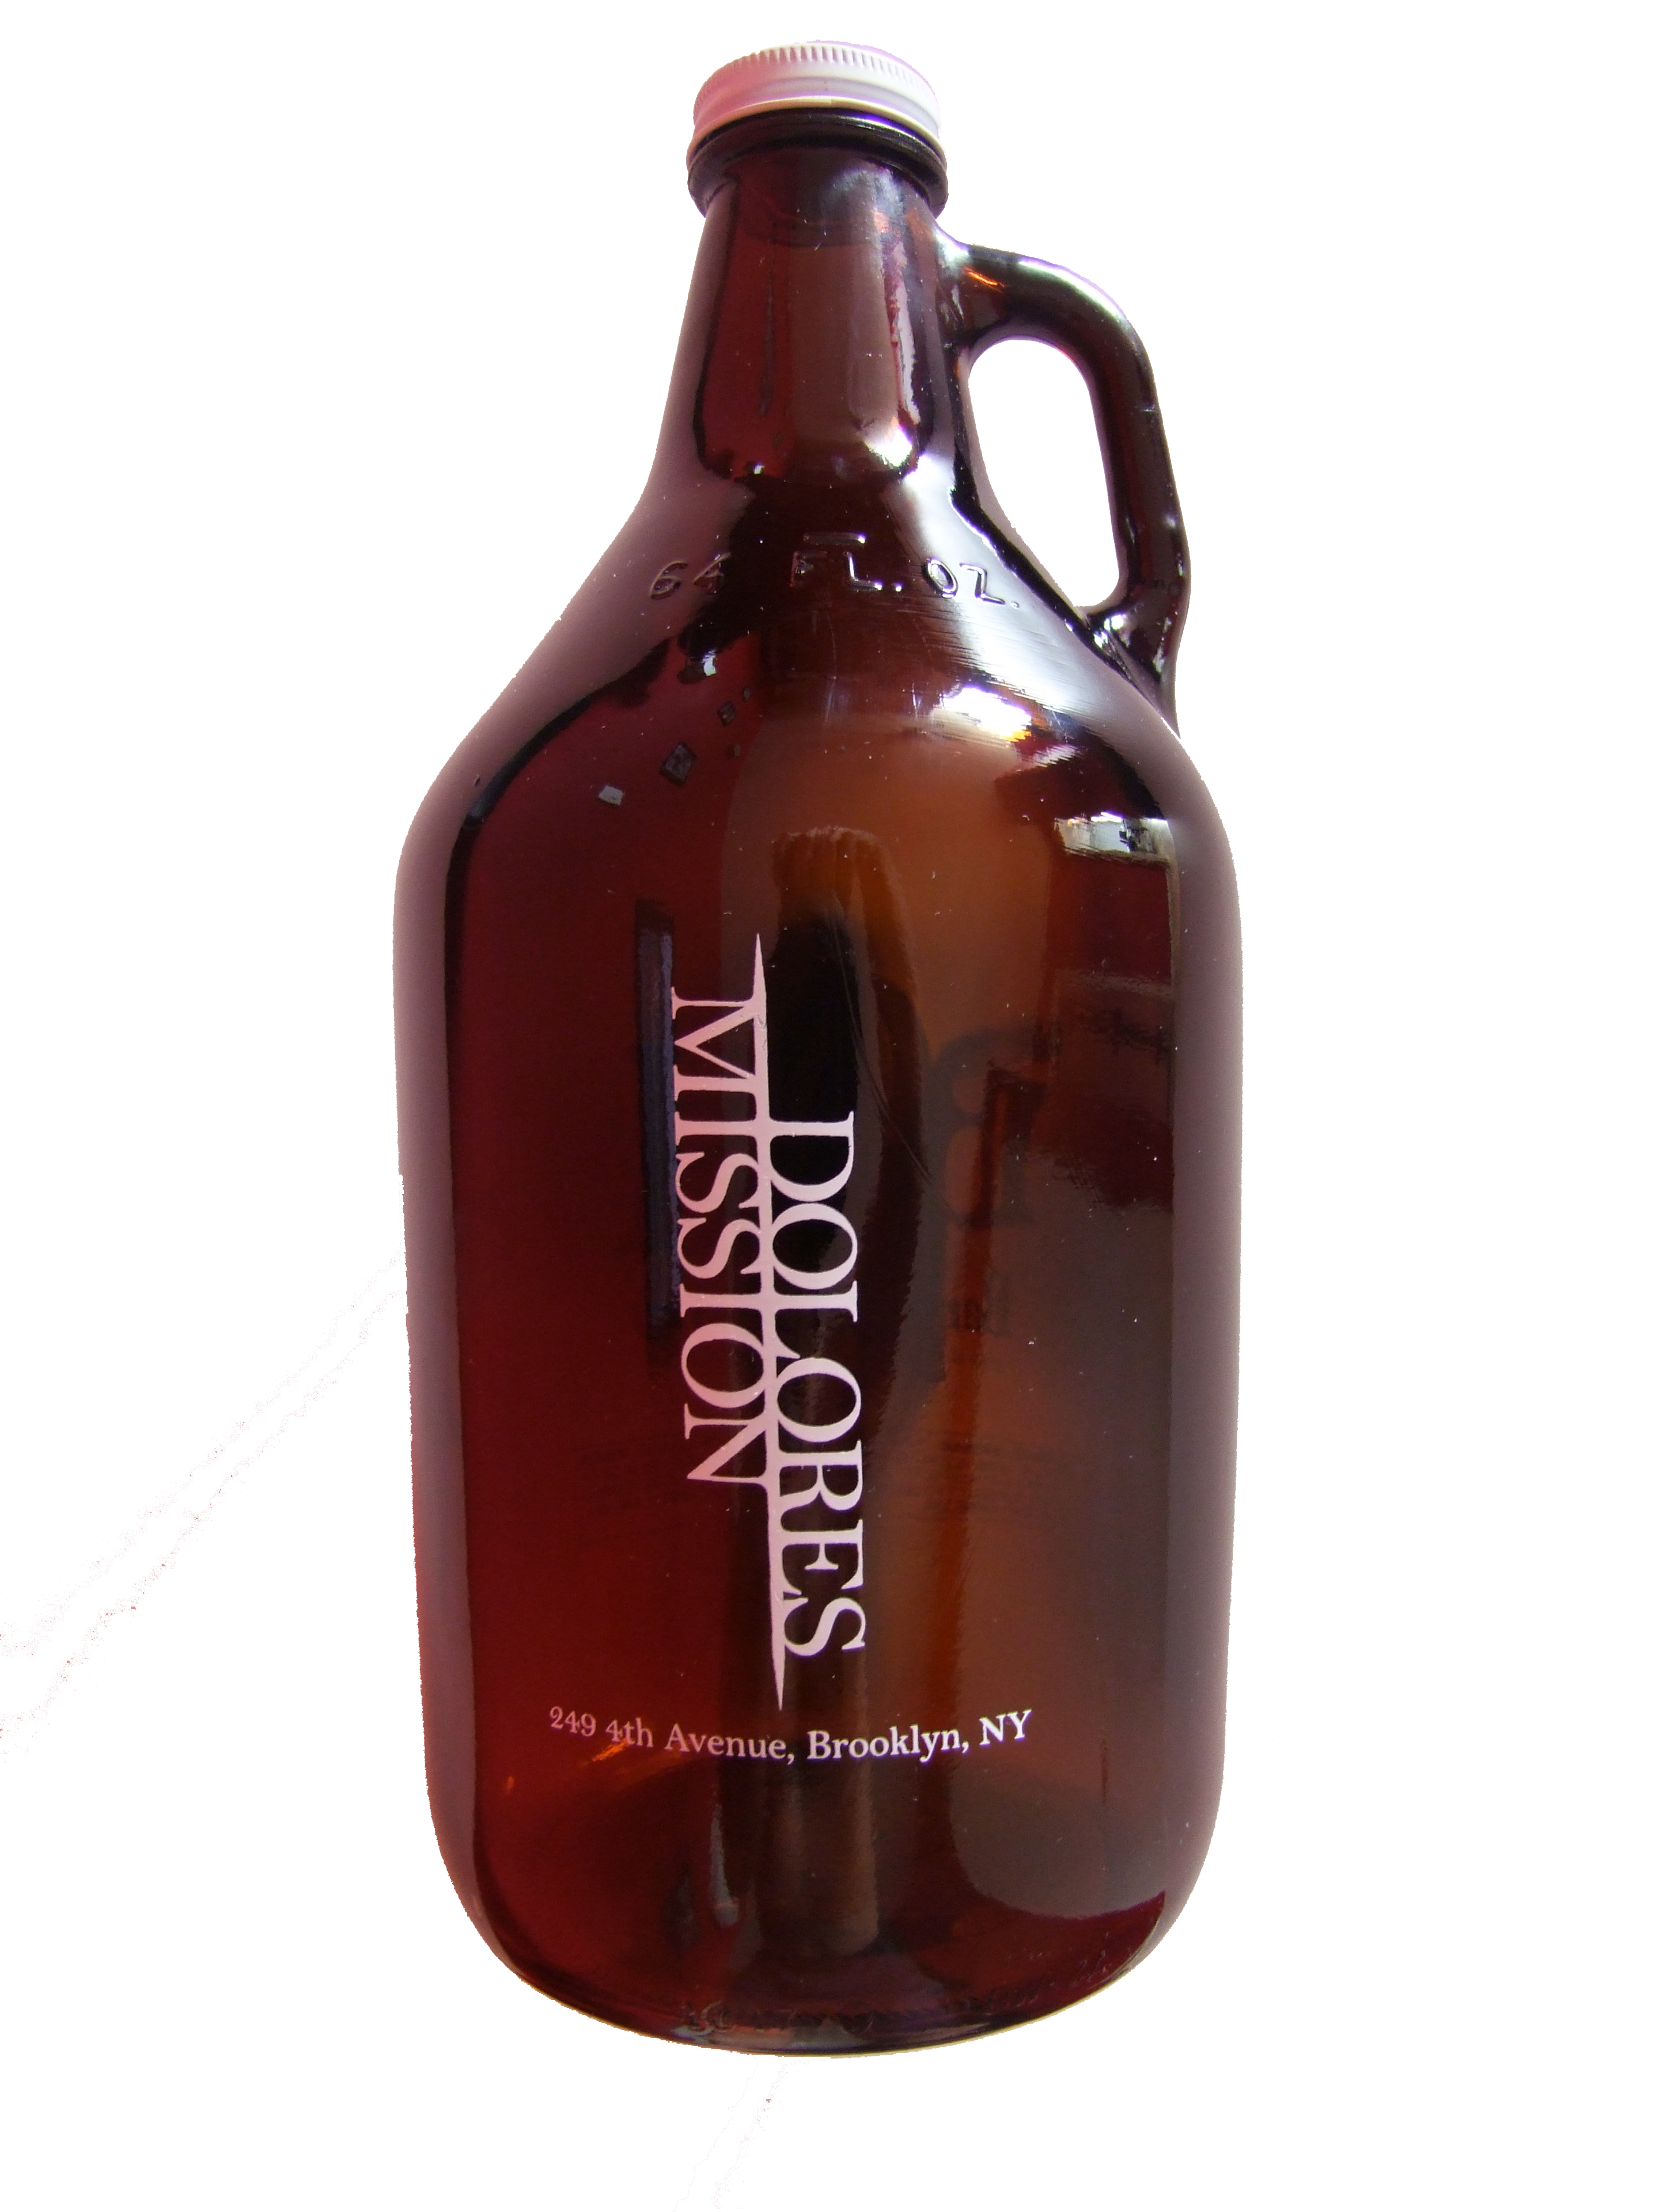 Mission Dolores Growler